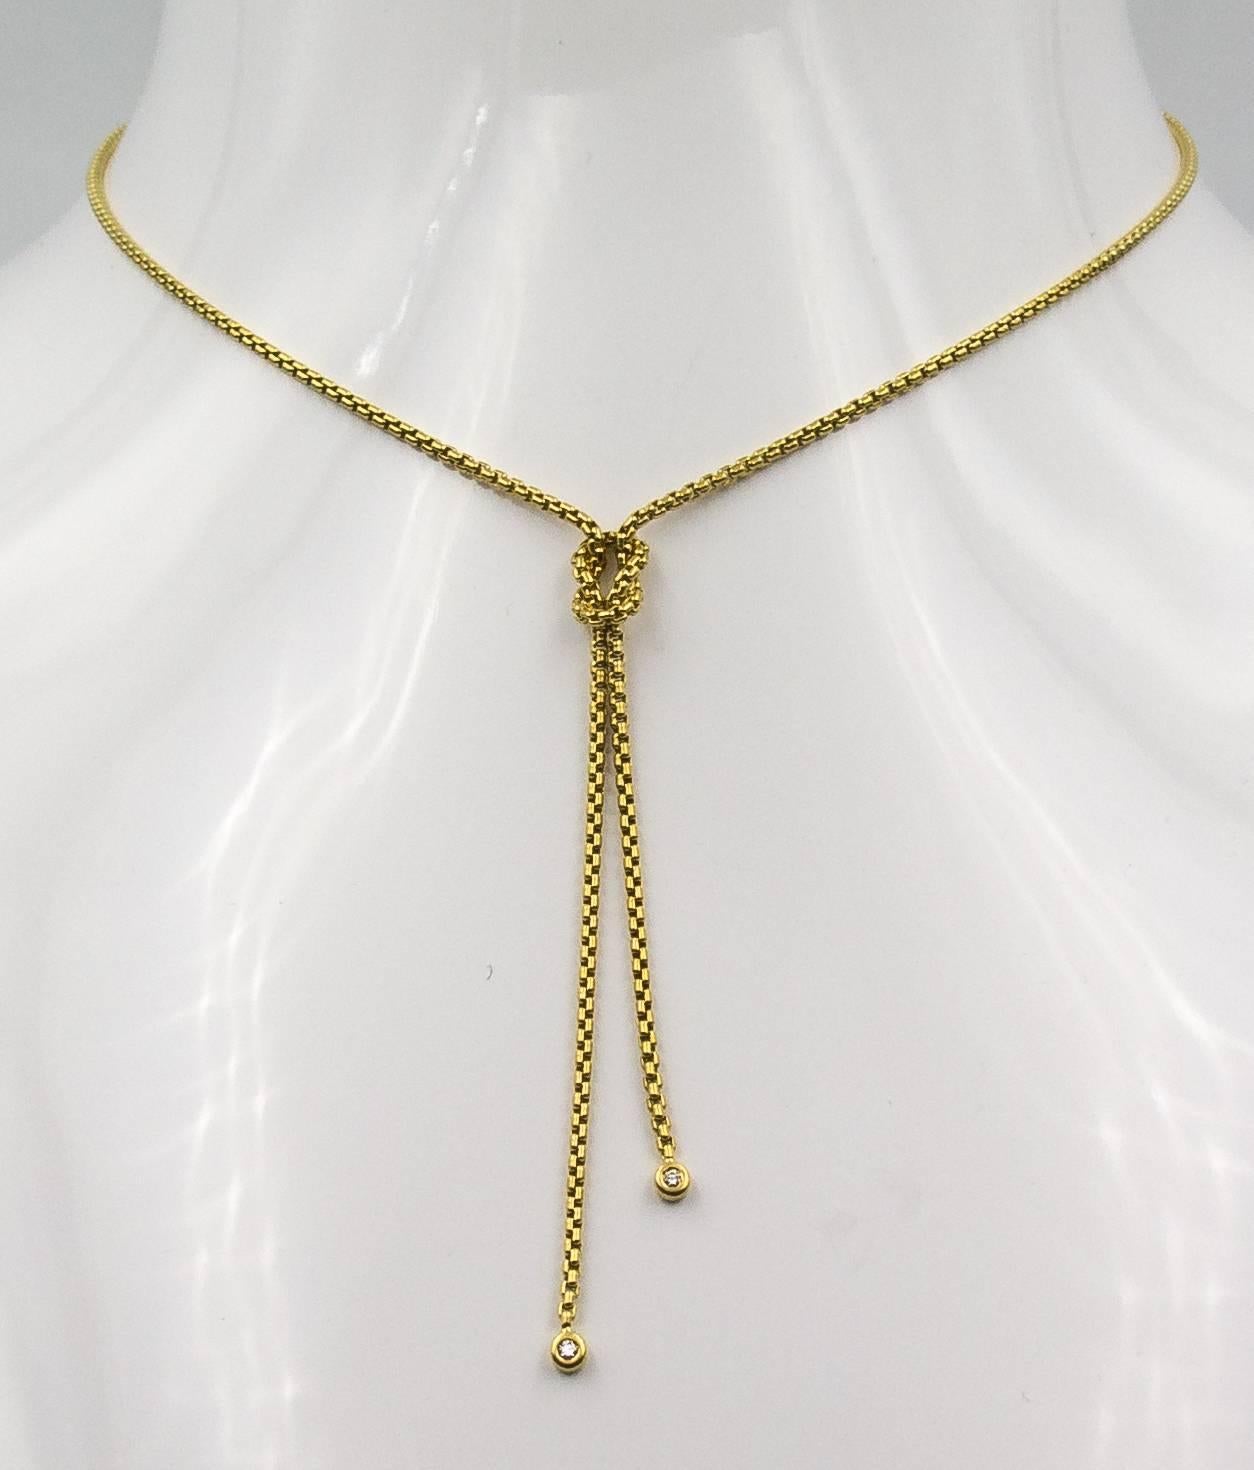 A chic and highly wearable necklace that goes anywhere and everywhere, from the well known designer David Yurman.   It's crafted in 18 karat yellow gold, with a Hercules knot at the base, and two drop chains each containing a small modern brilliant